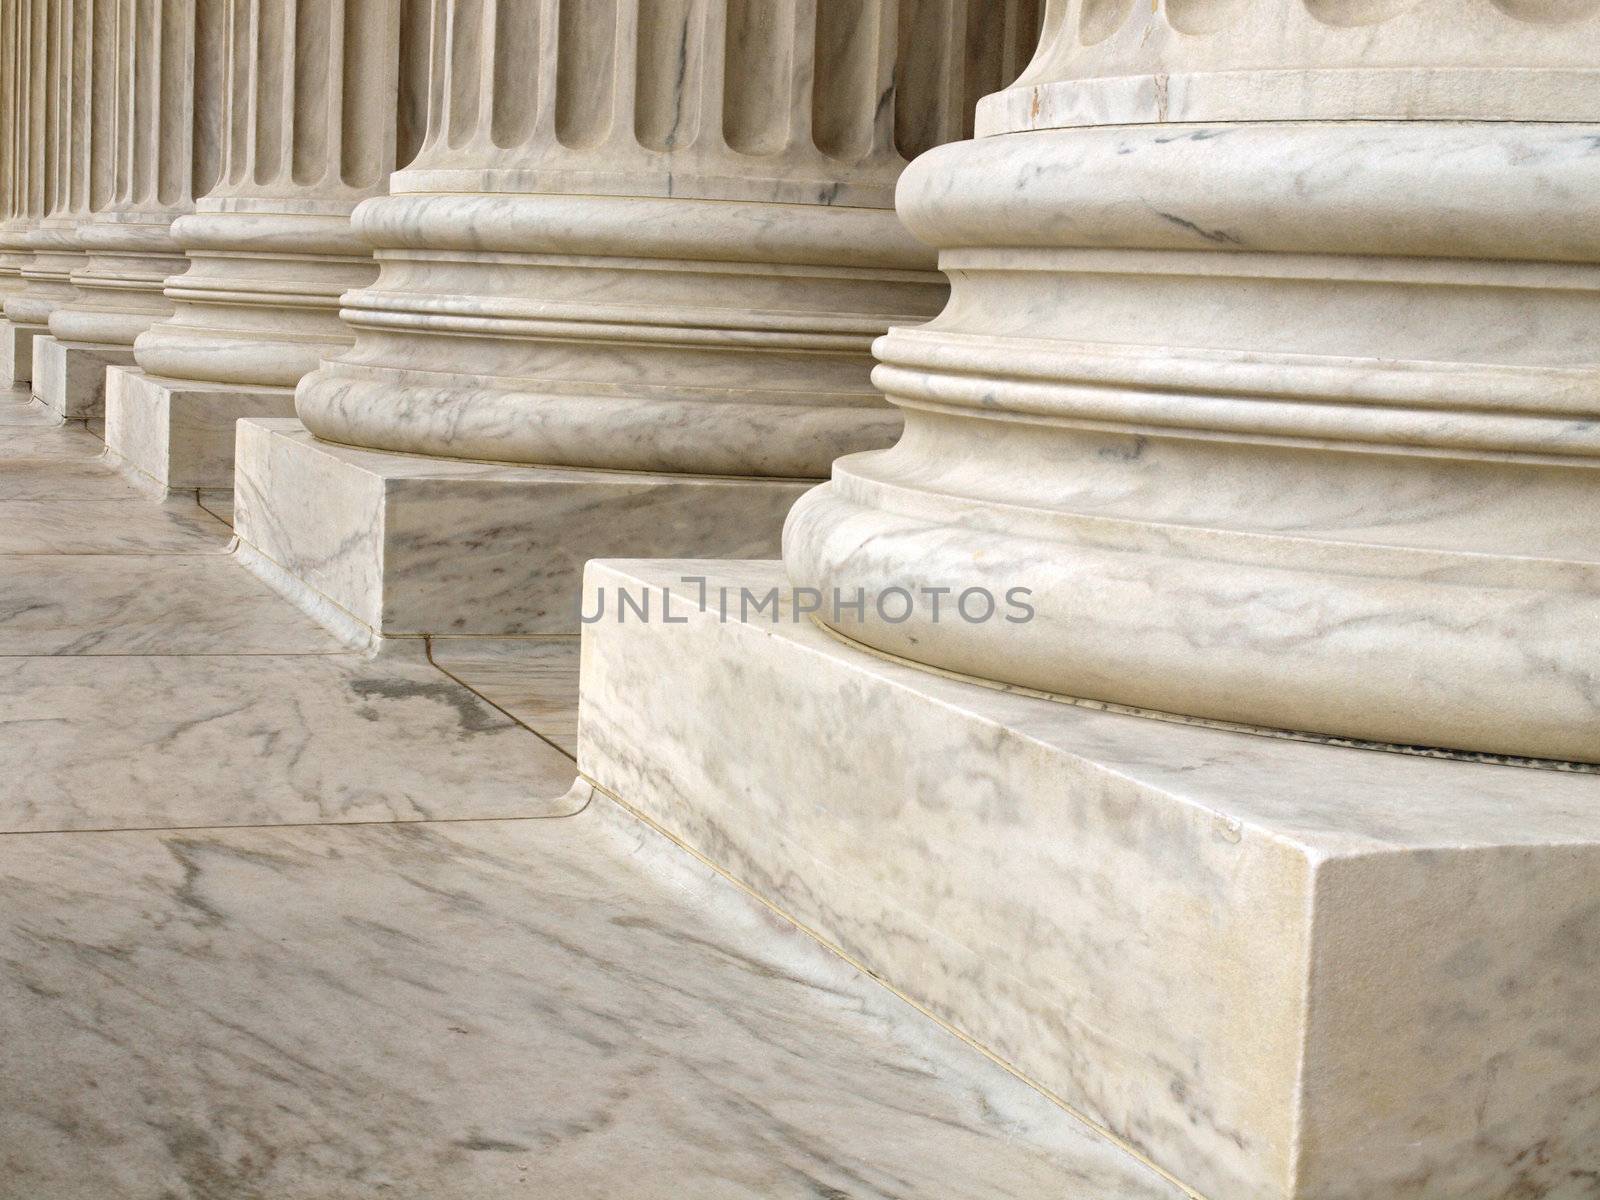 Columns at the United States Supreme Court in Washington DC